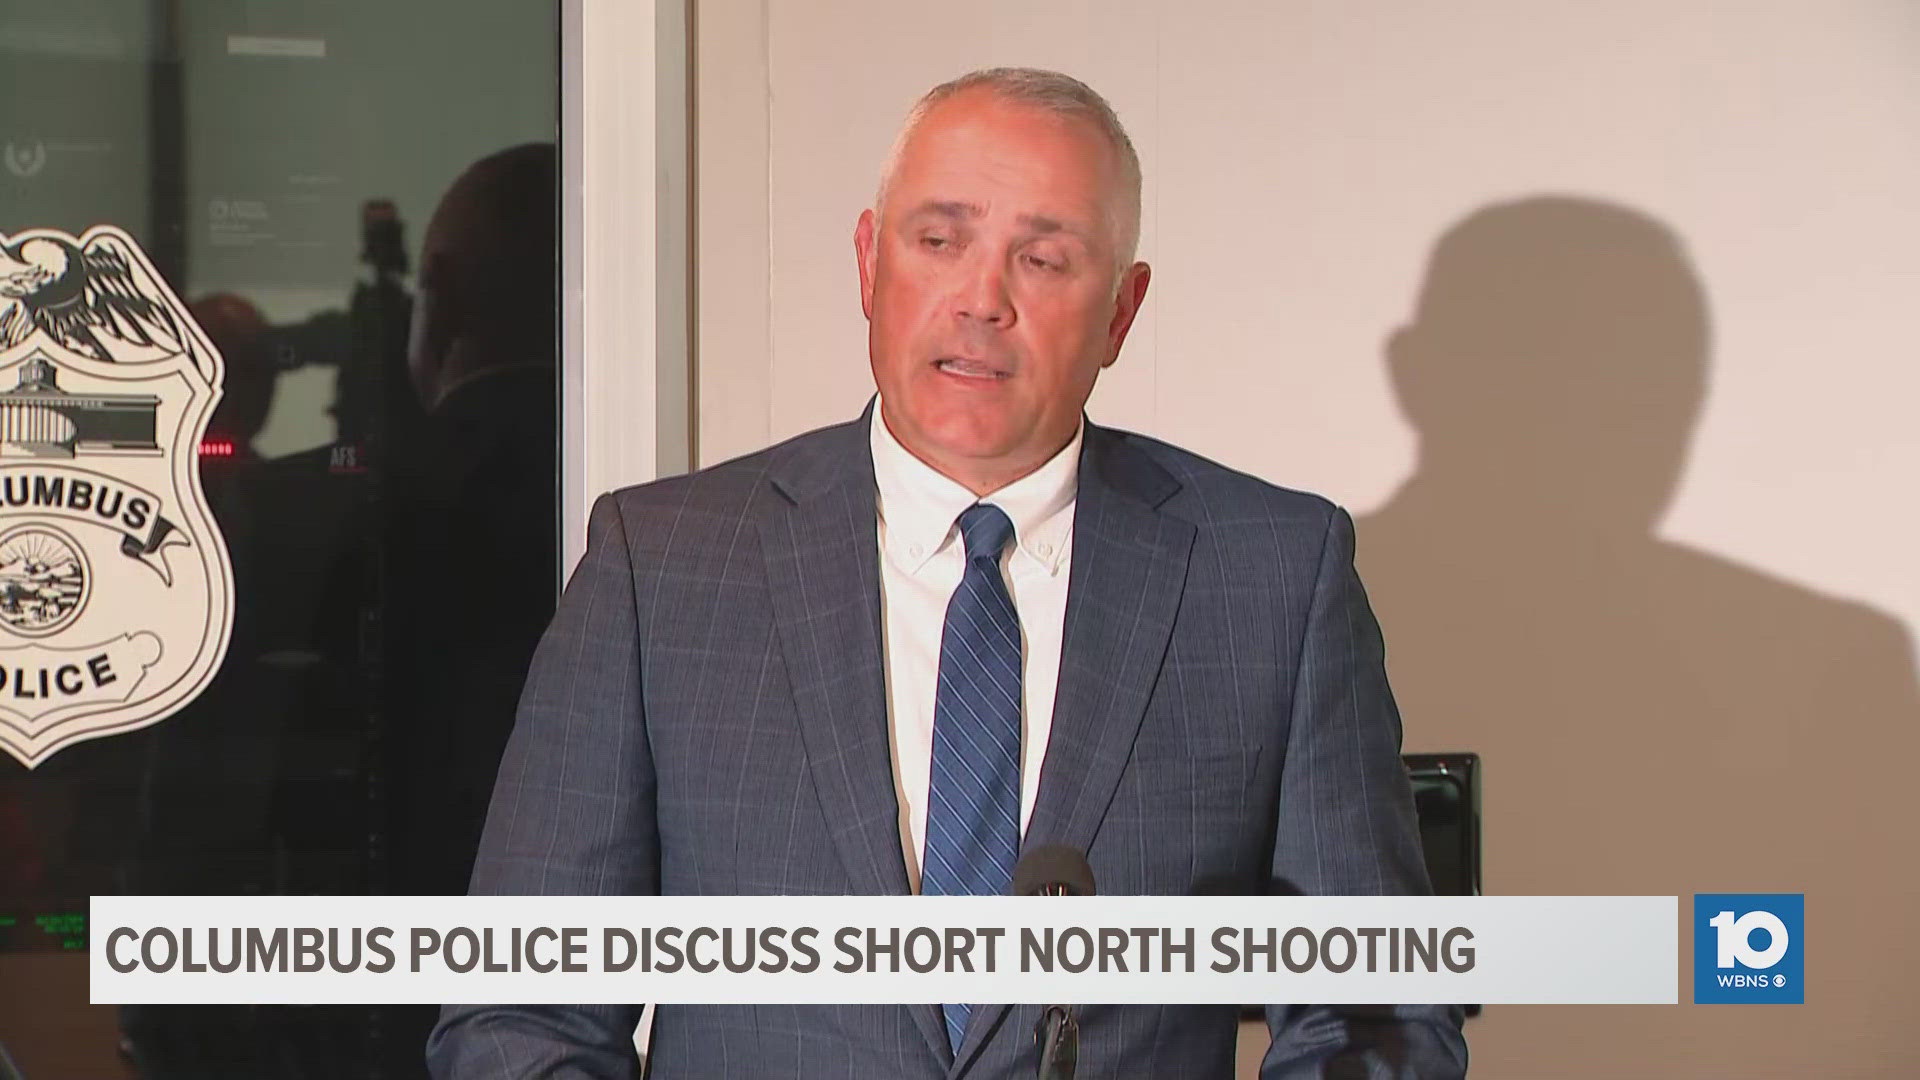 Authorities held a press briefing on a shooting in the Short North Arts District that happened over the weekend and left 10 people injured.